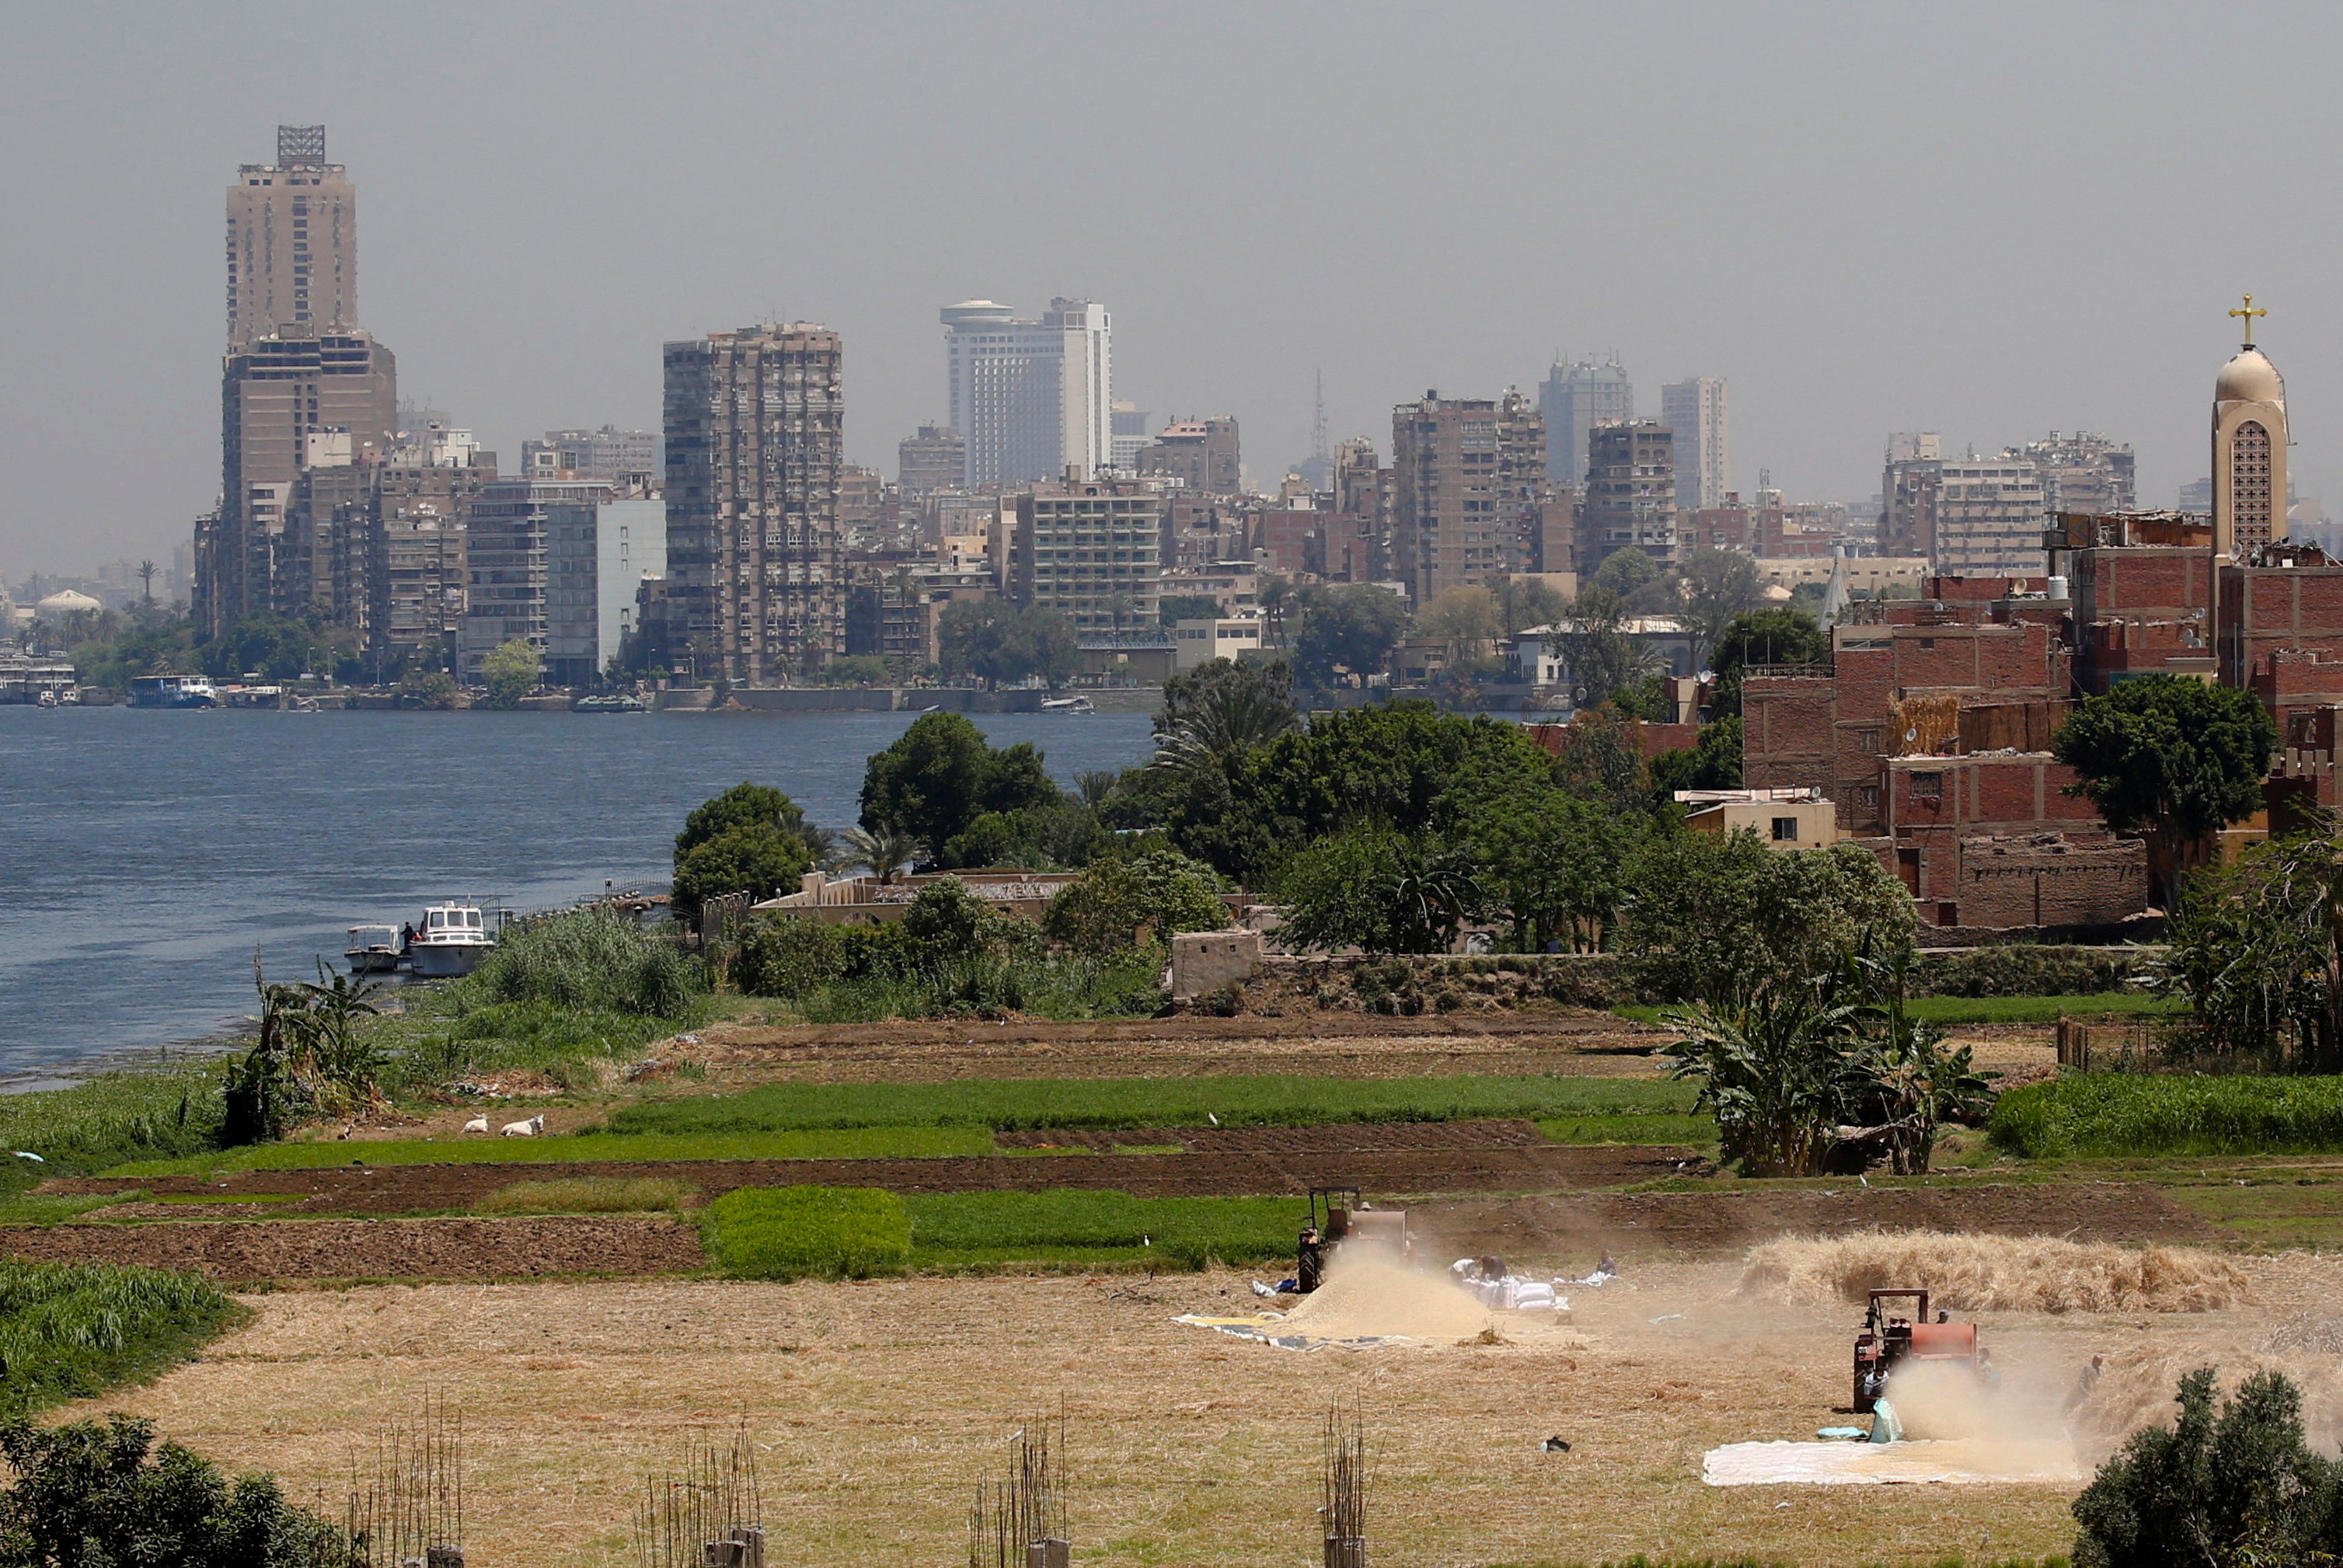 Farmers use a threshing machine as they harvest their wheat crop at a farmland on an island on the River Nile next to the capital city of Cairo